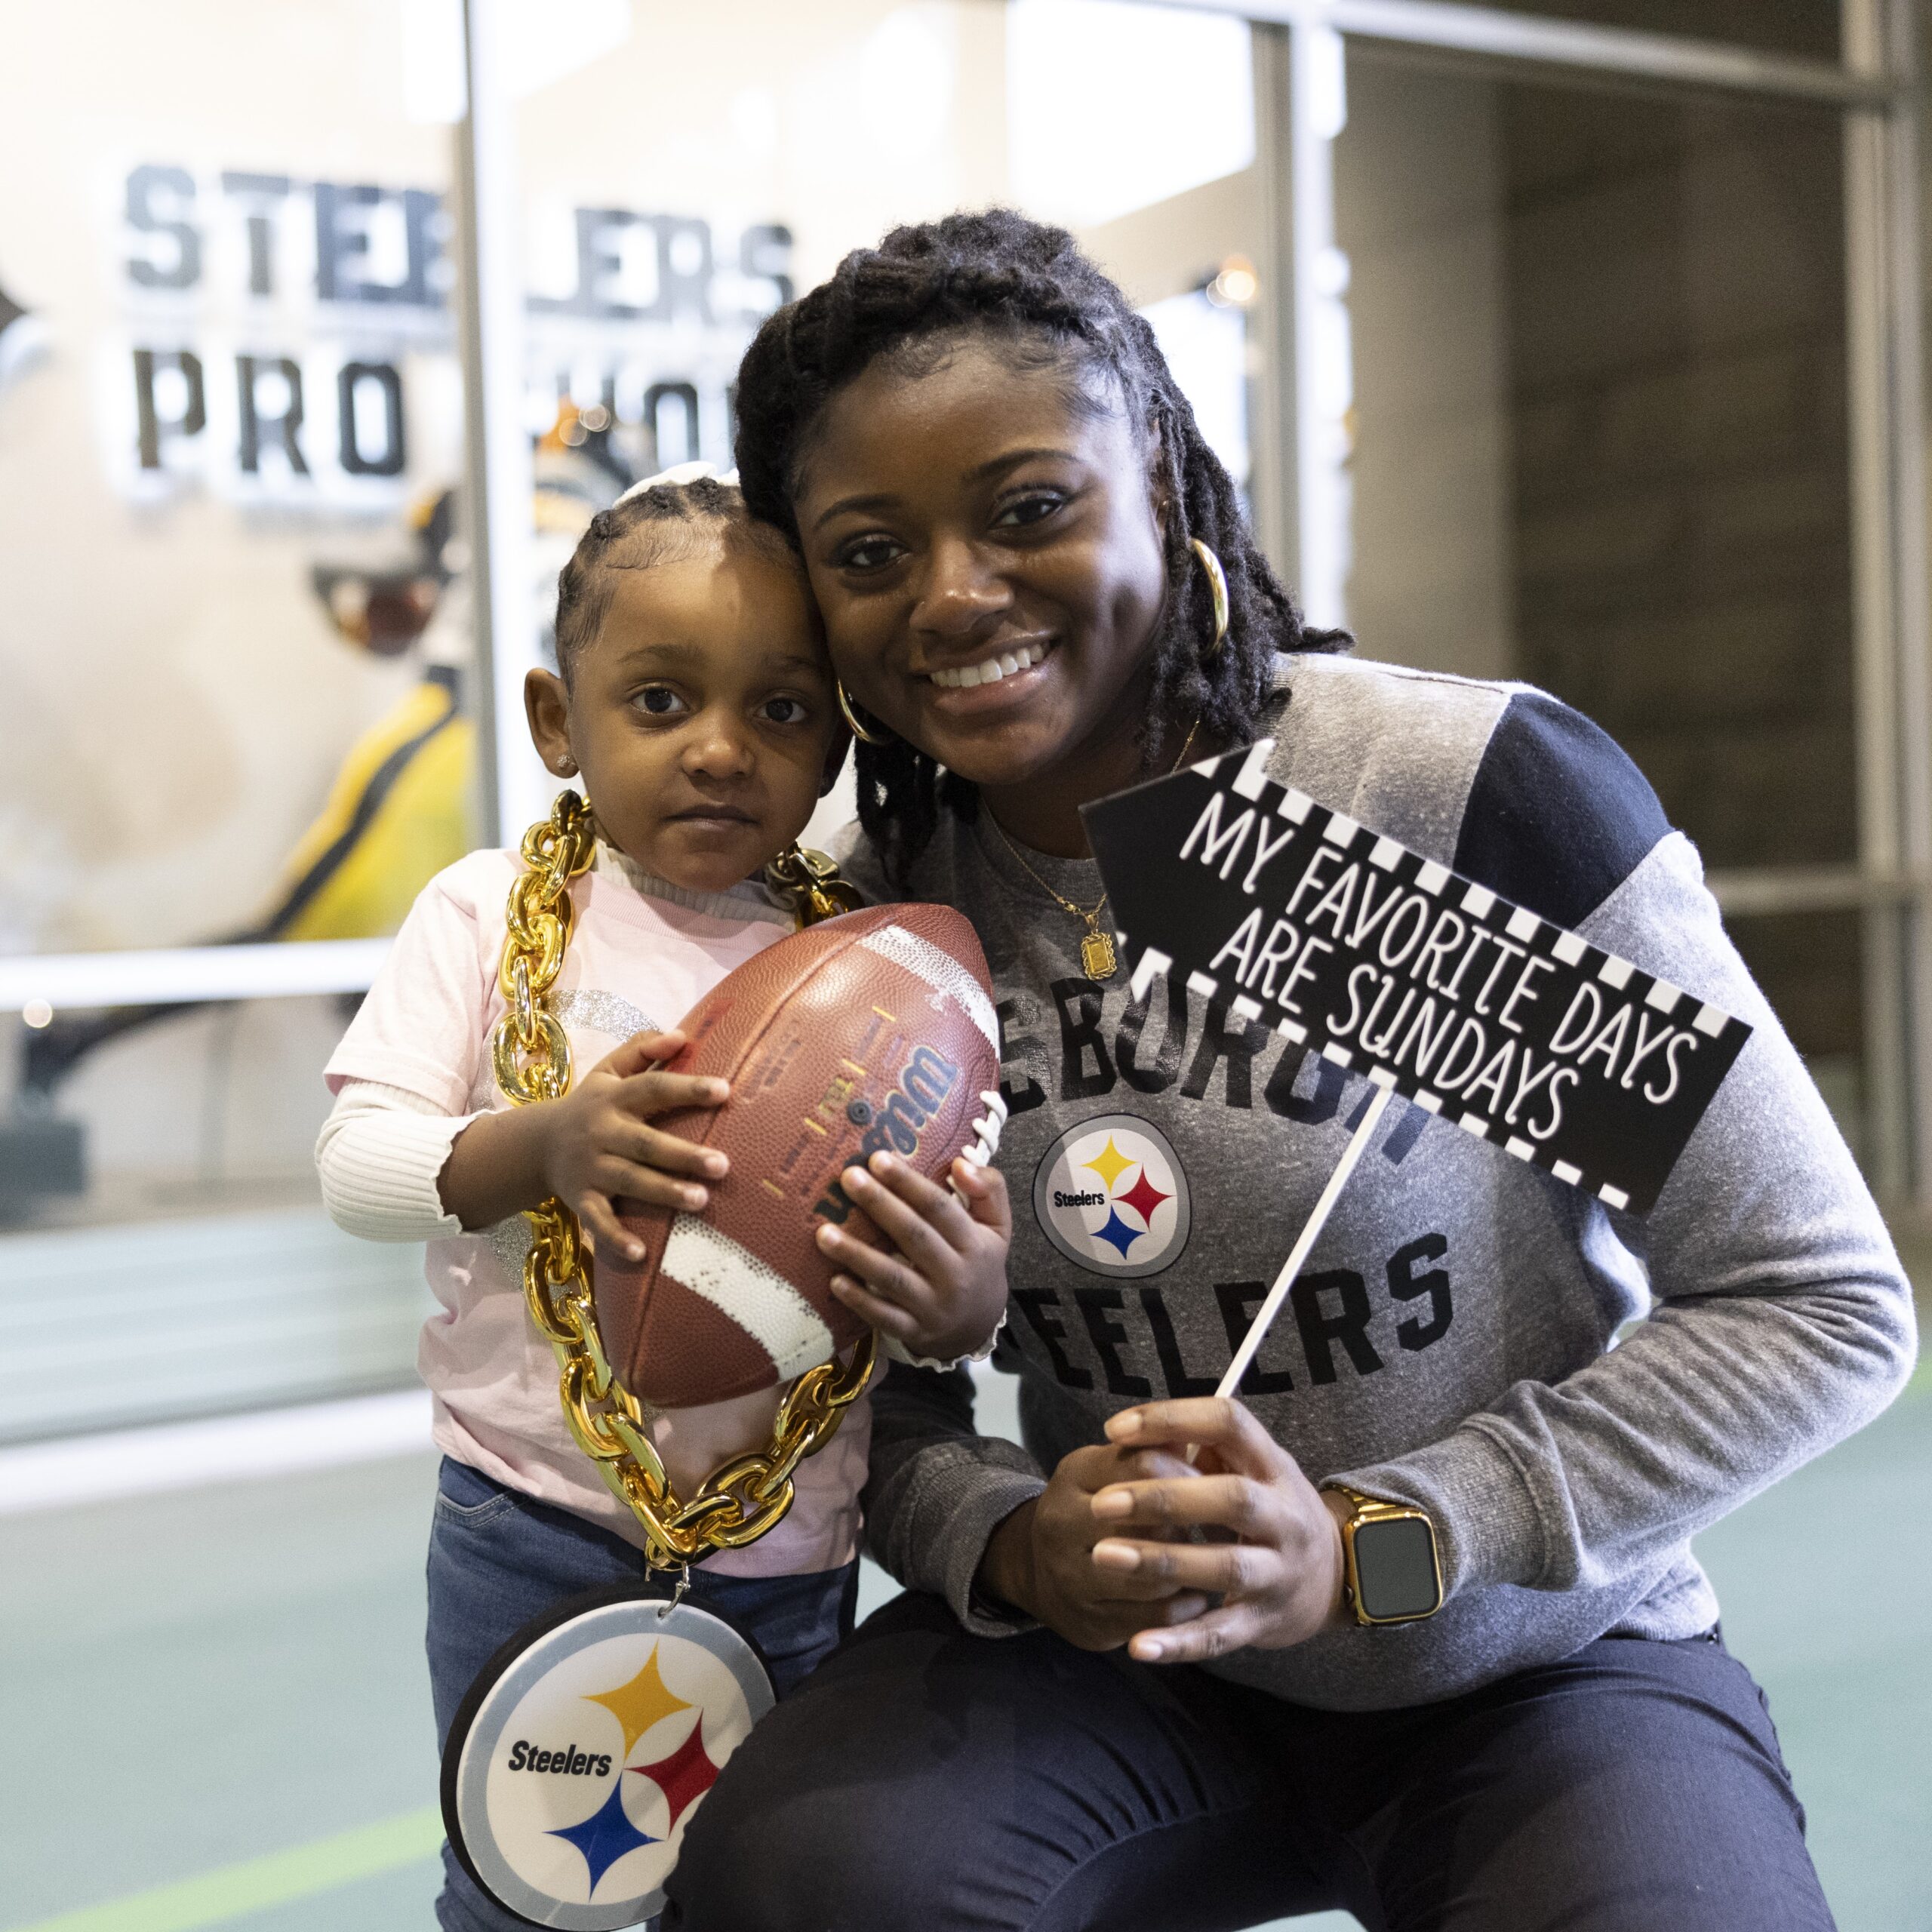 A photo of a woman posing with her young child at the SteelHERS Social event. They are holding photo op props.